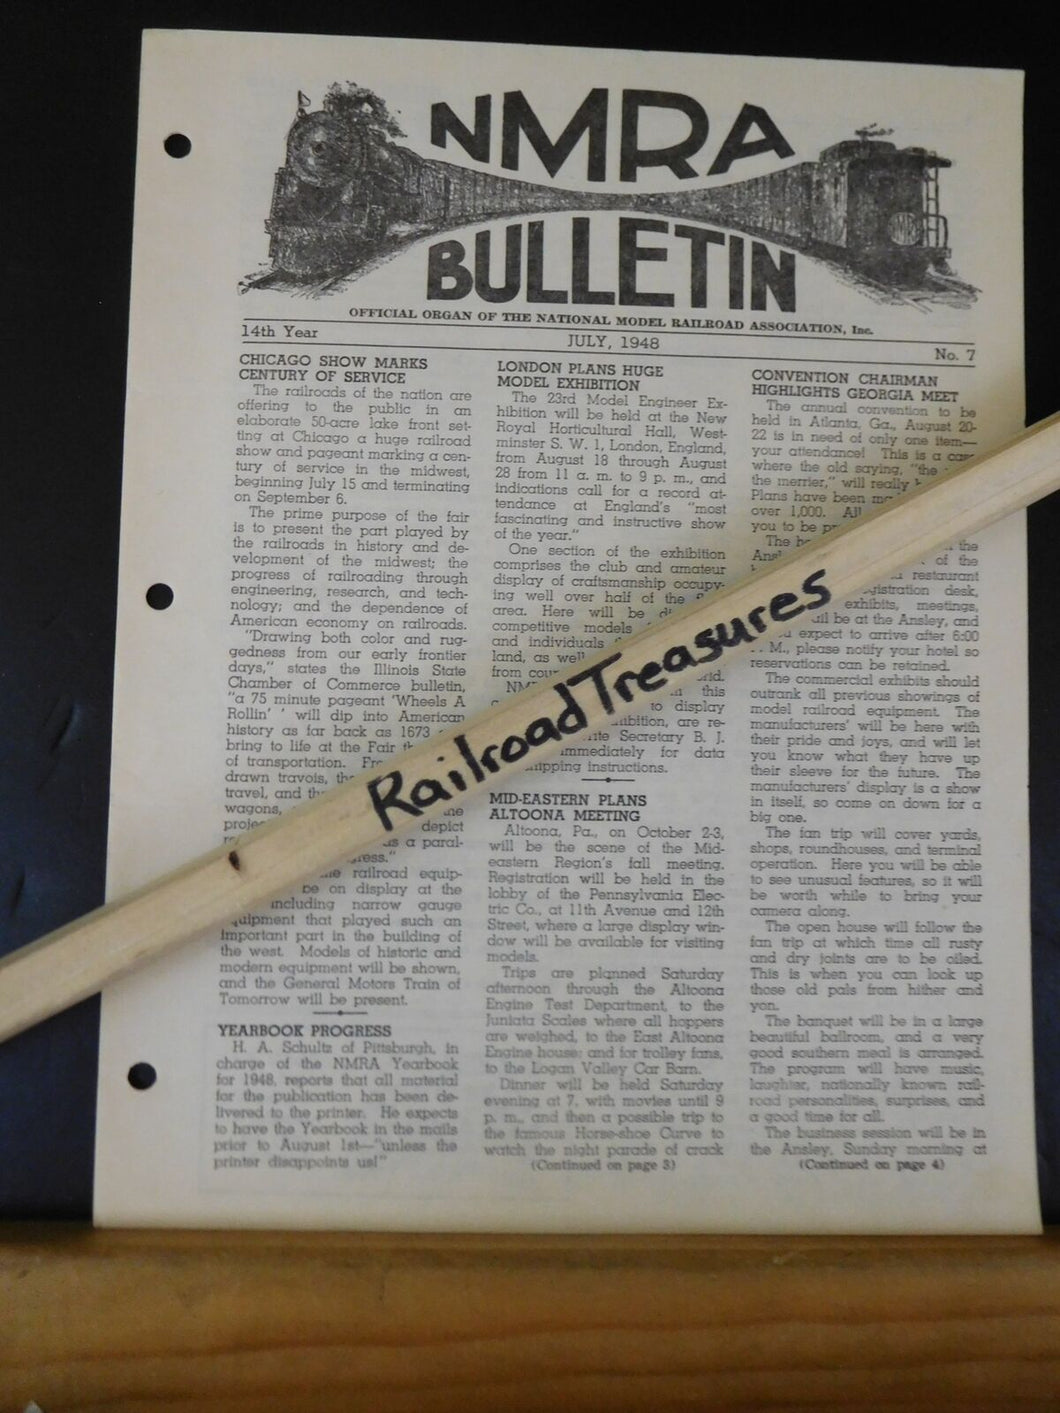 NMRA Bulletin 1948 July #7 of 14th Year London plans huge model exhibition